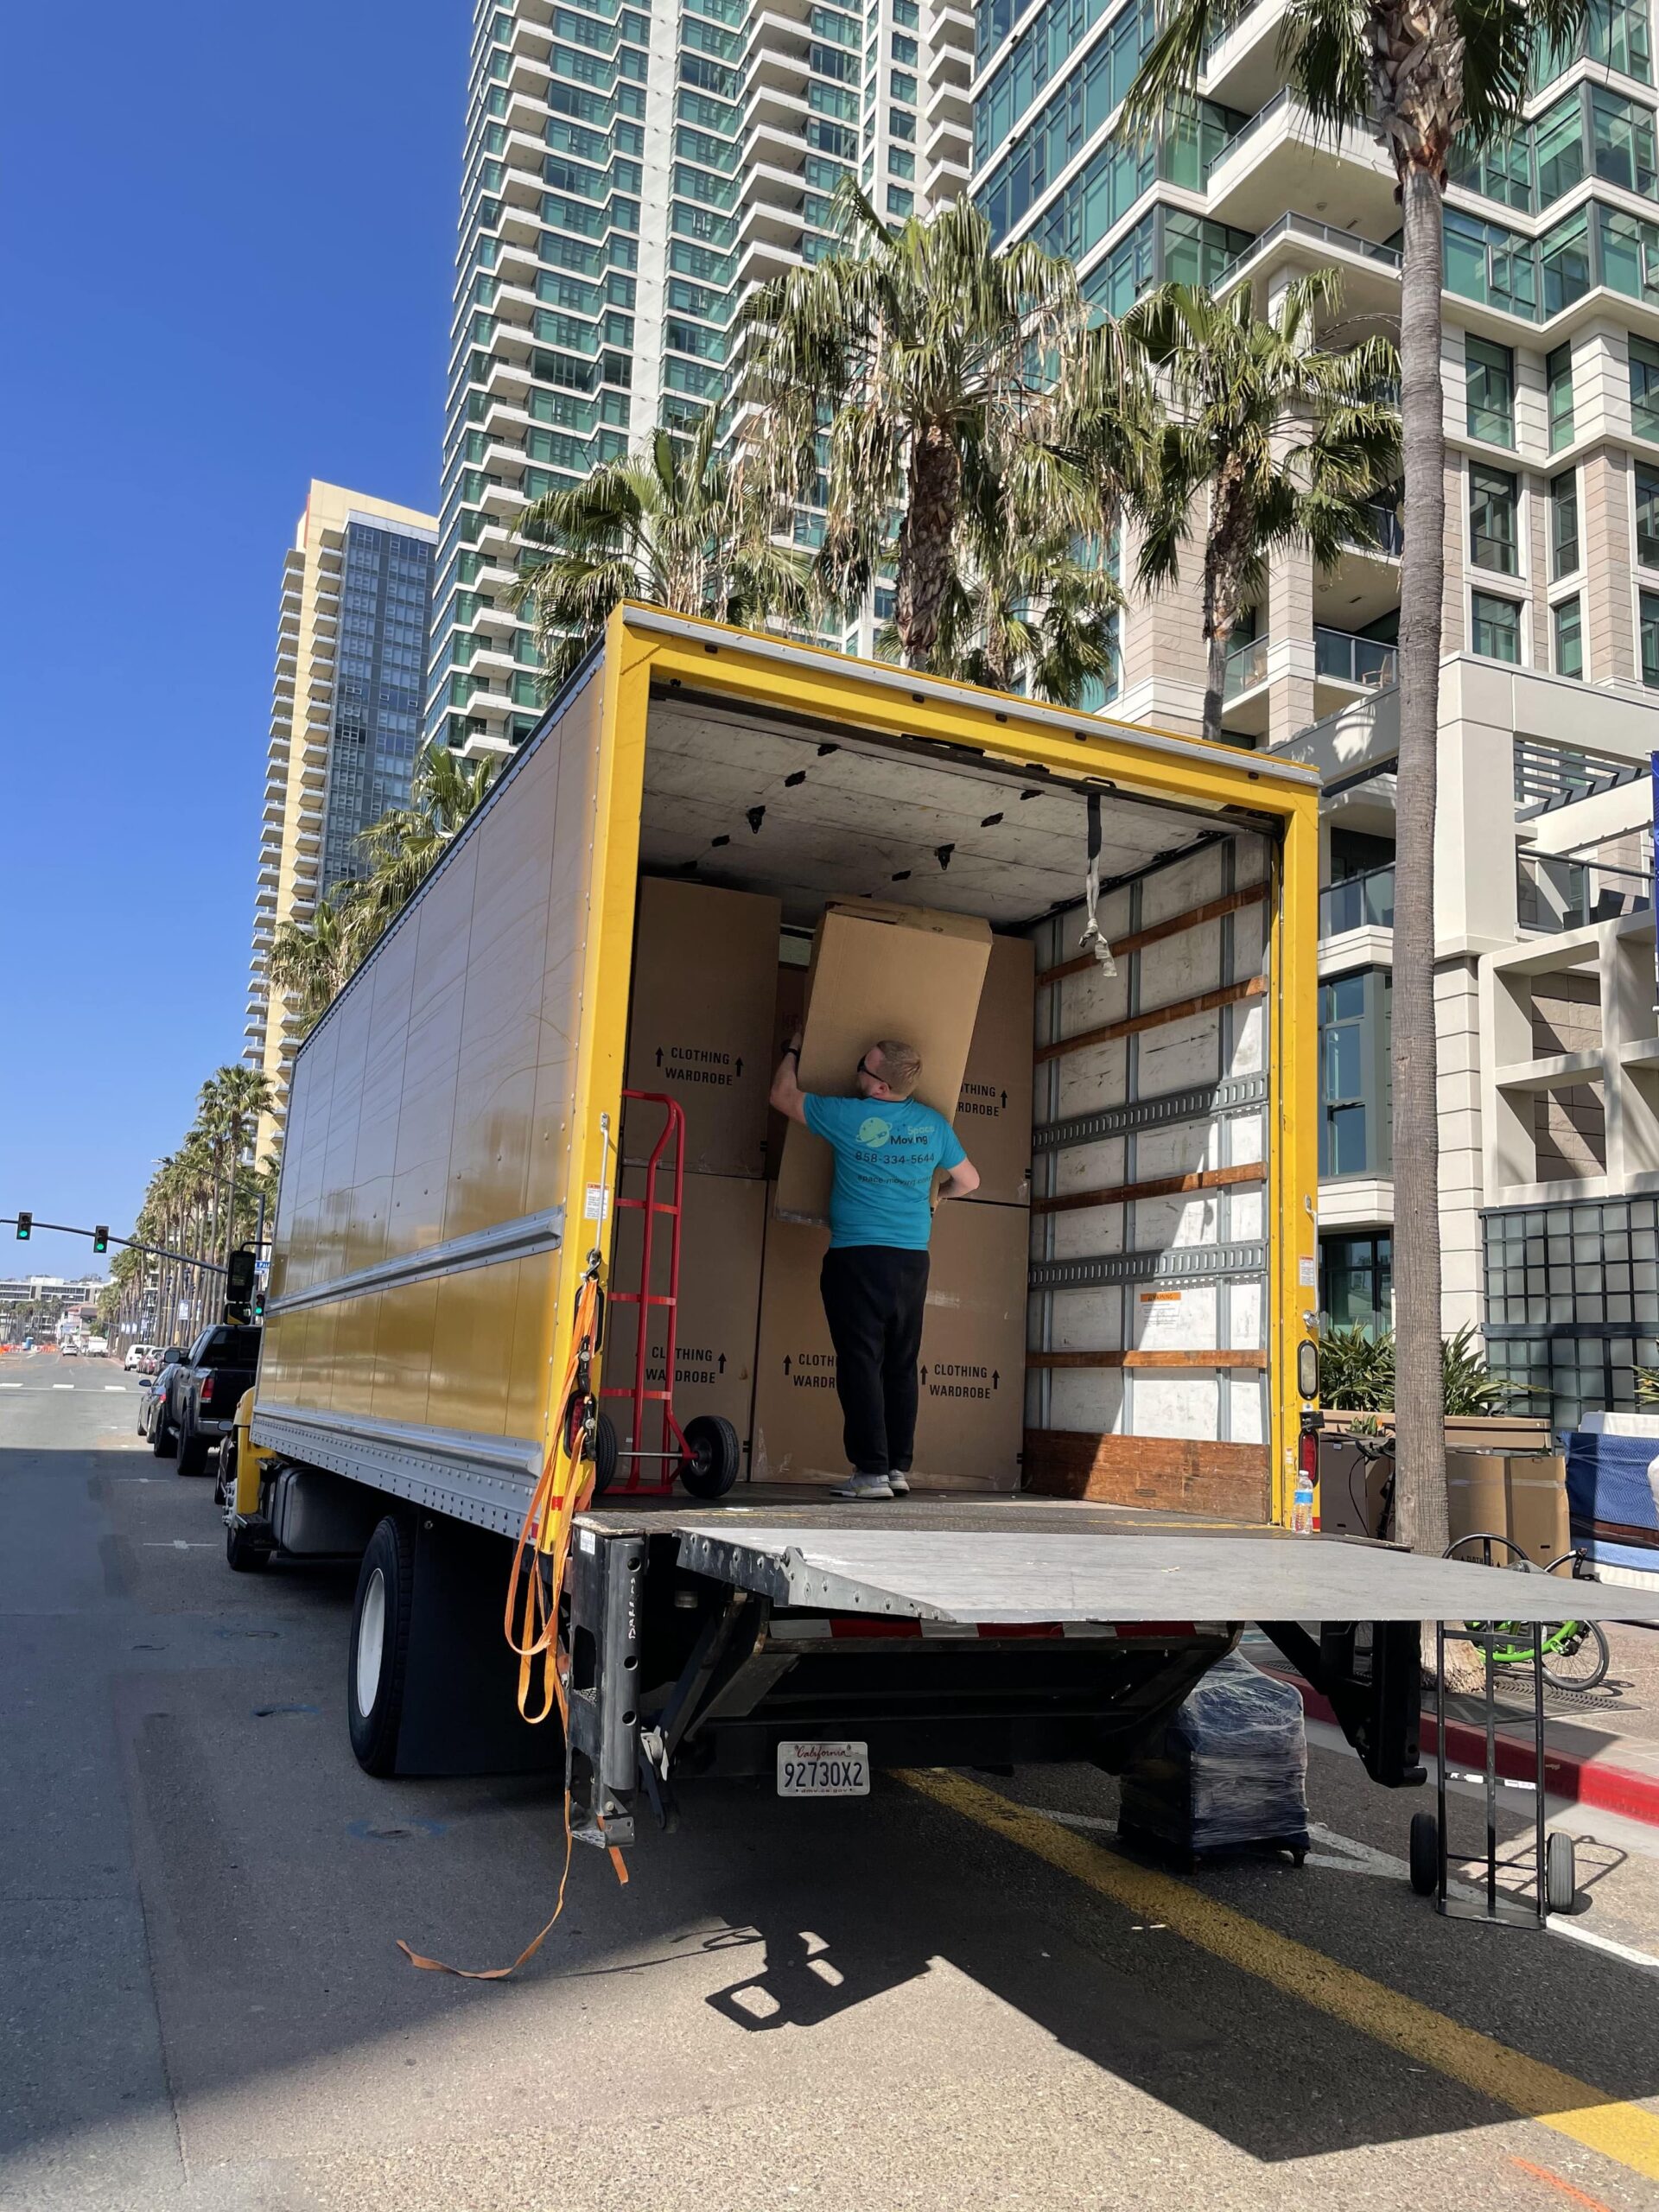 Relocating Soon? Choose Our Trusted Moving Company